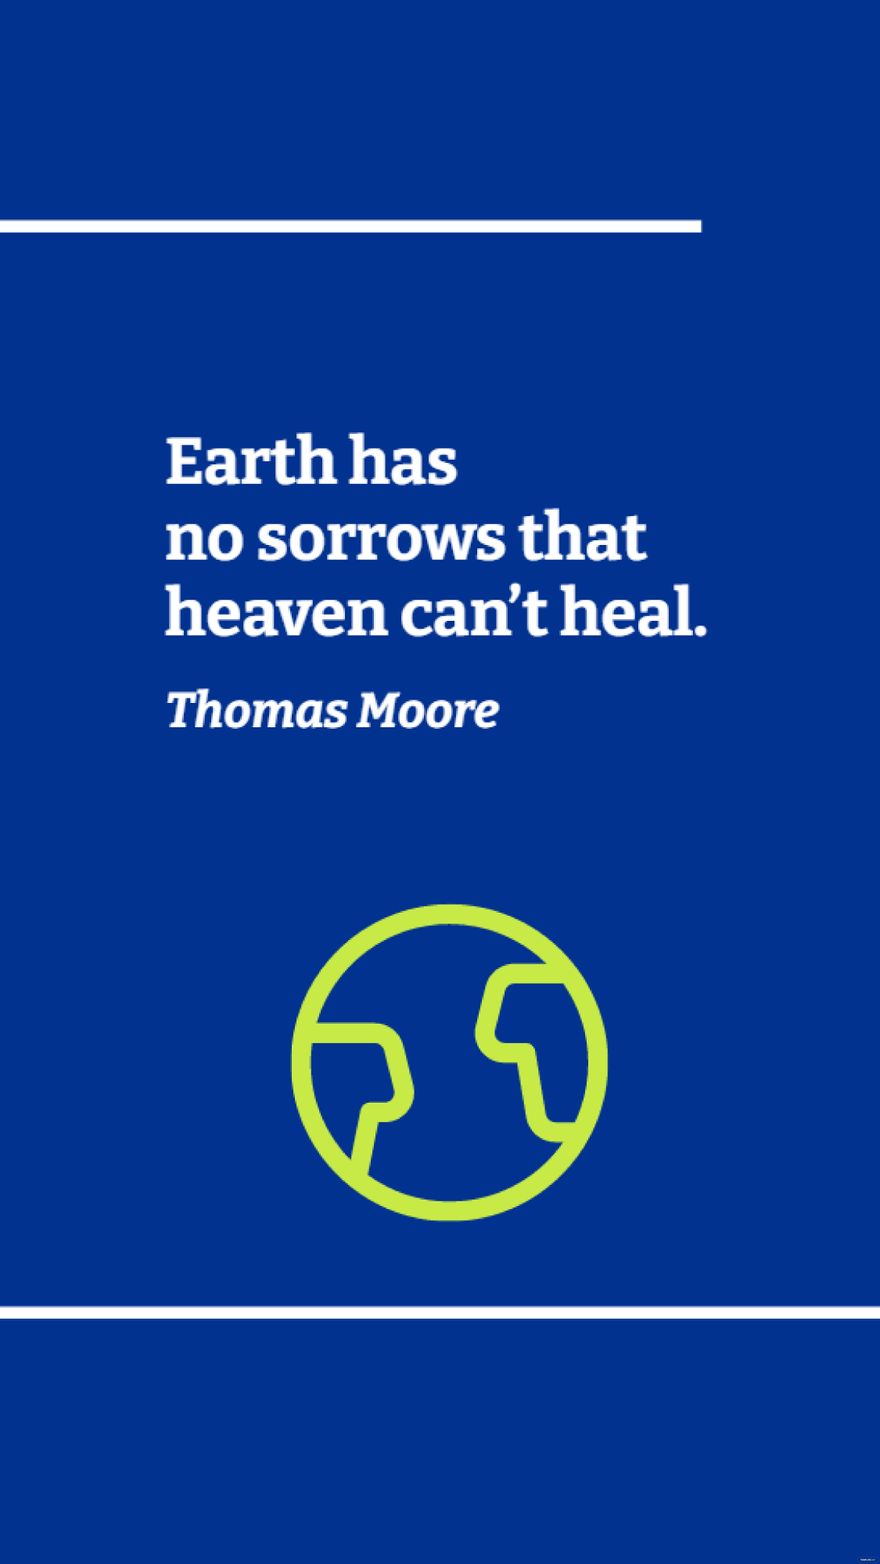 Thomas Moore - Earth has no sorrows that heaven can’t heal. in JPG